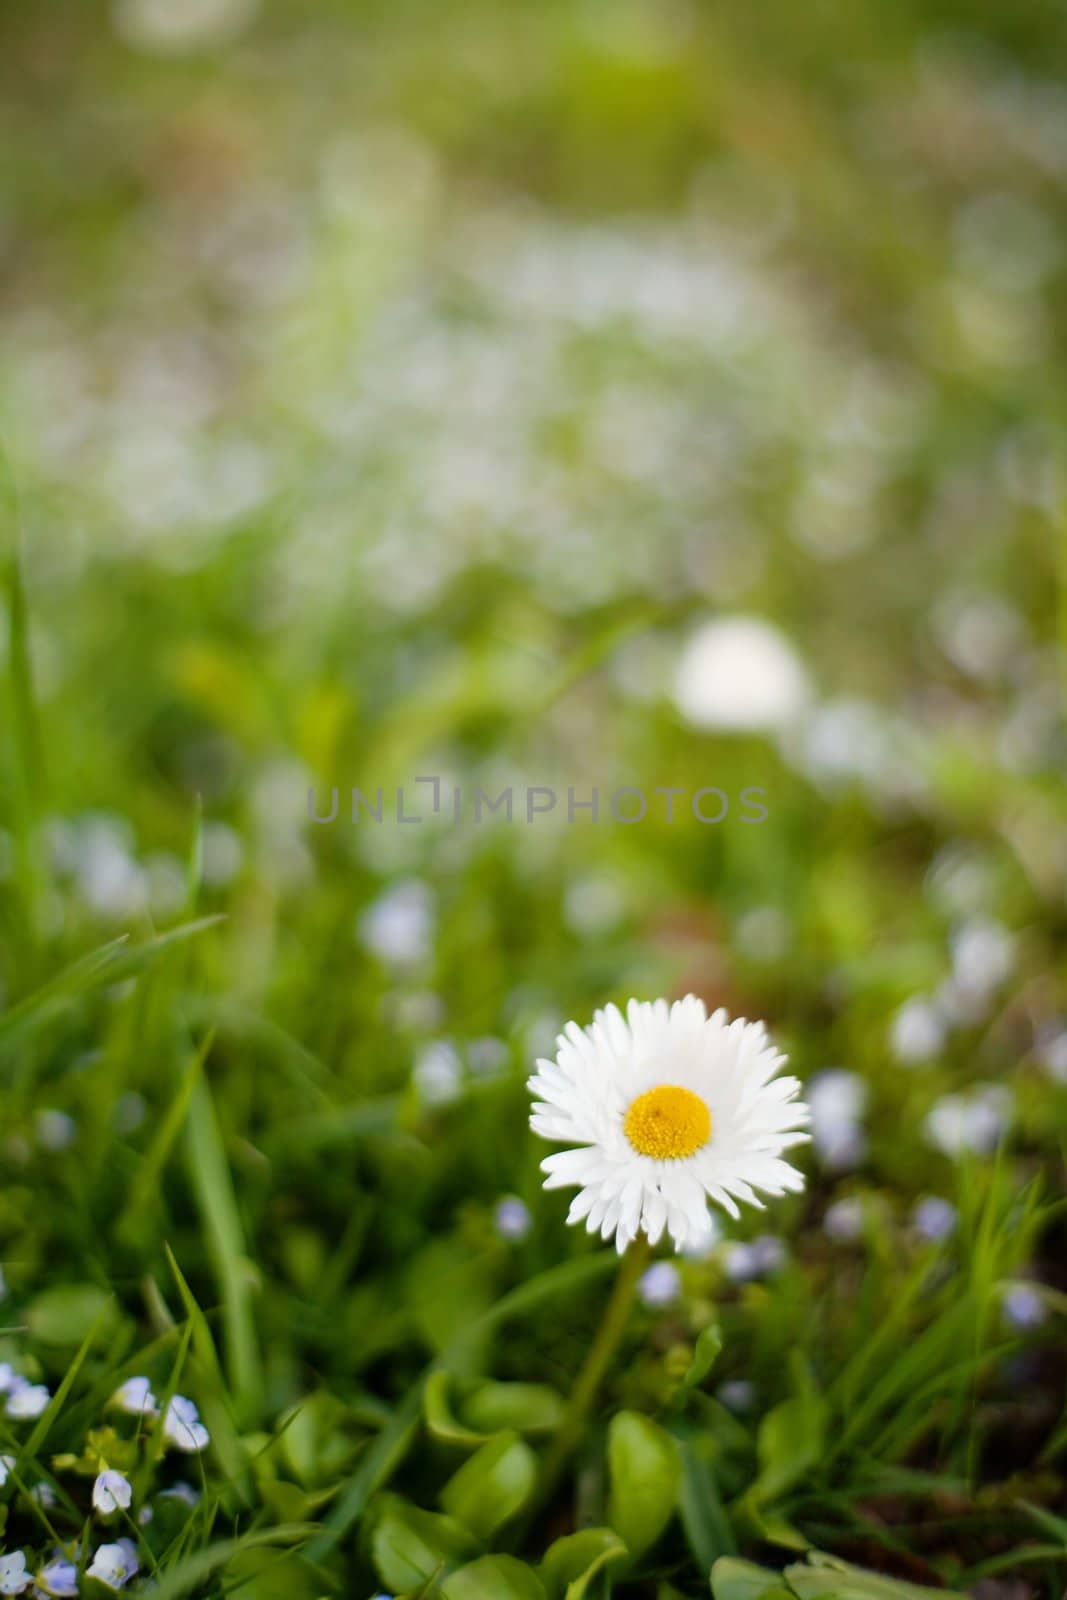 An image of a nice flower of daisy